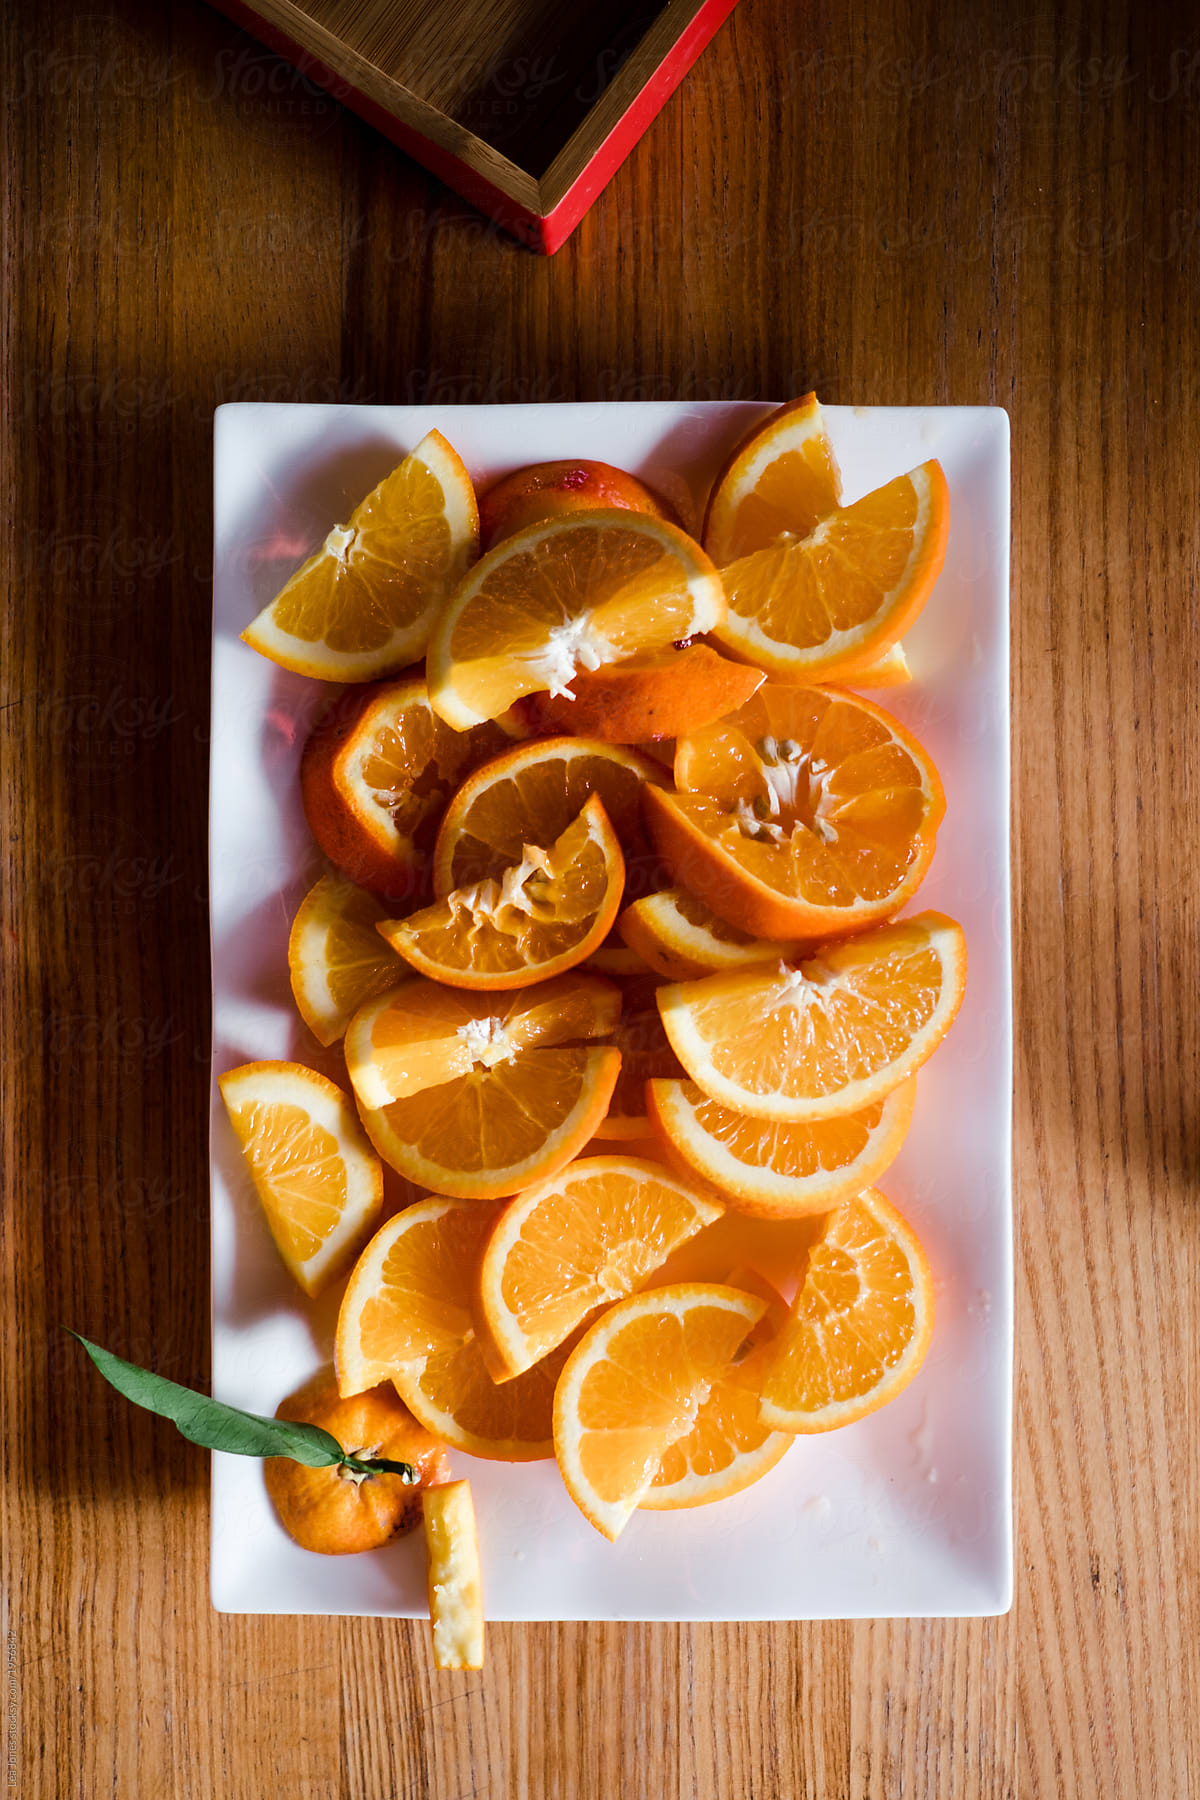 Cut up oranges on plate